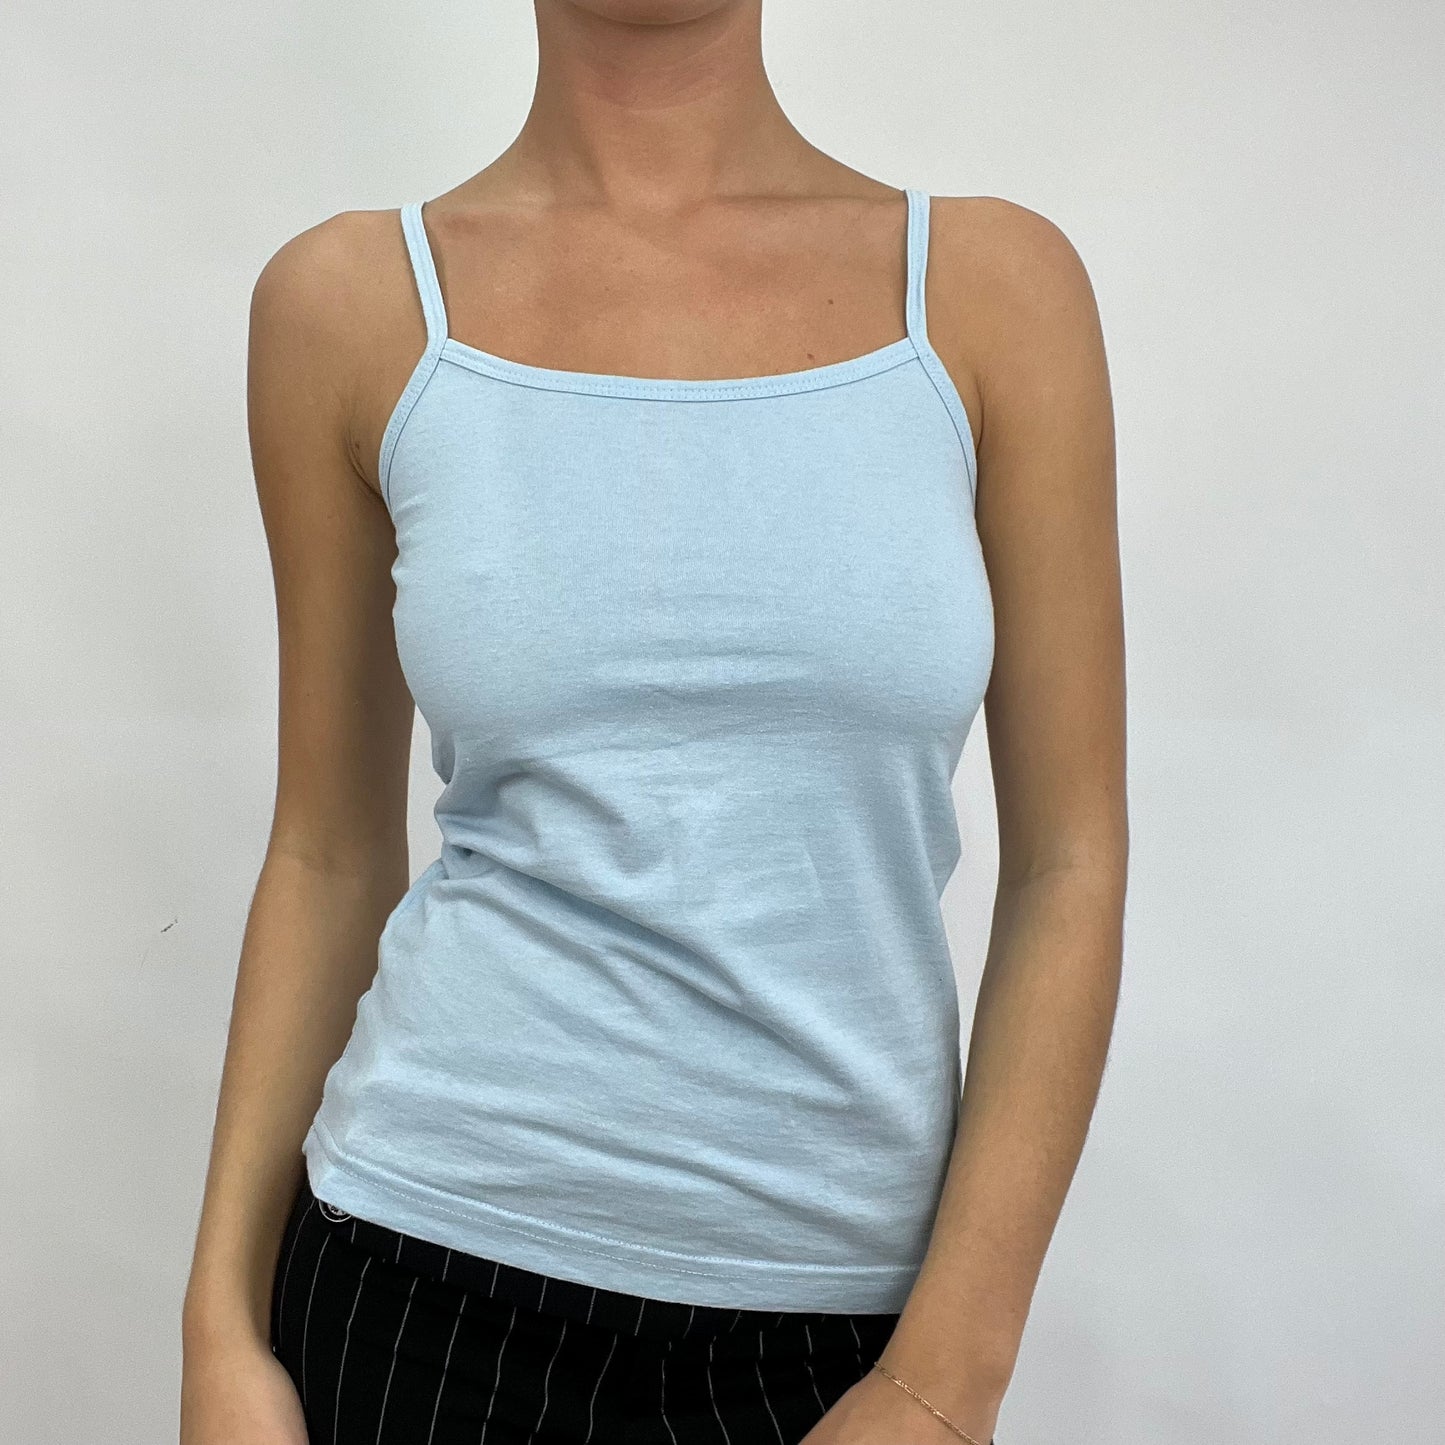 CARRIE BRADSHAW DROP | small baby blue cami vest top